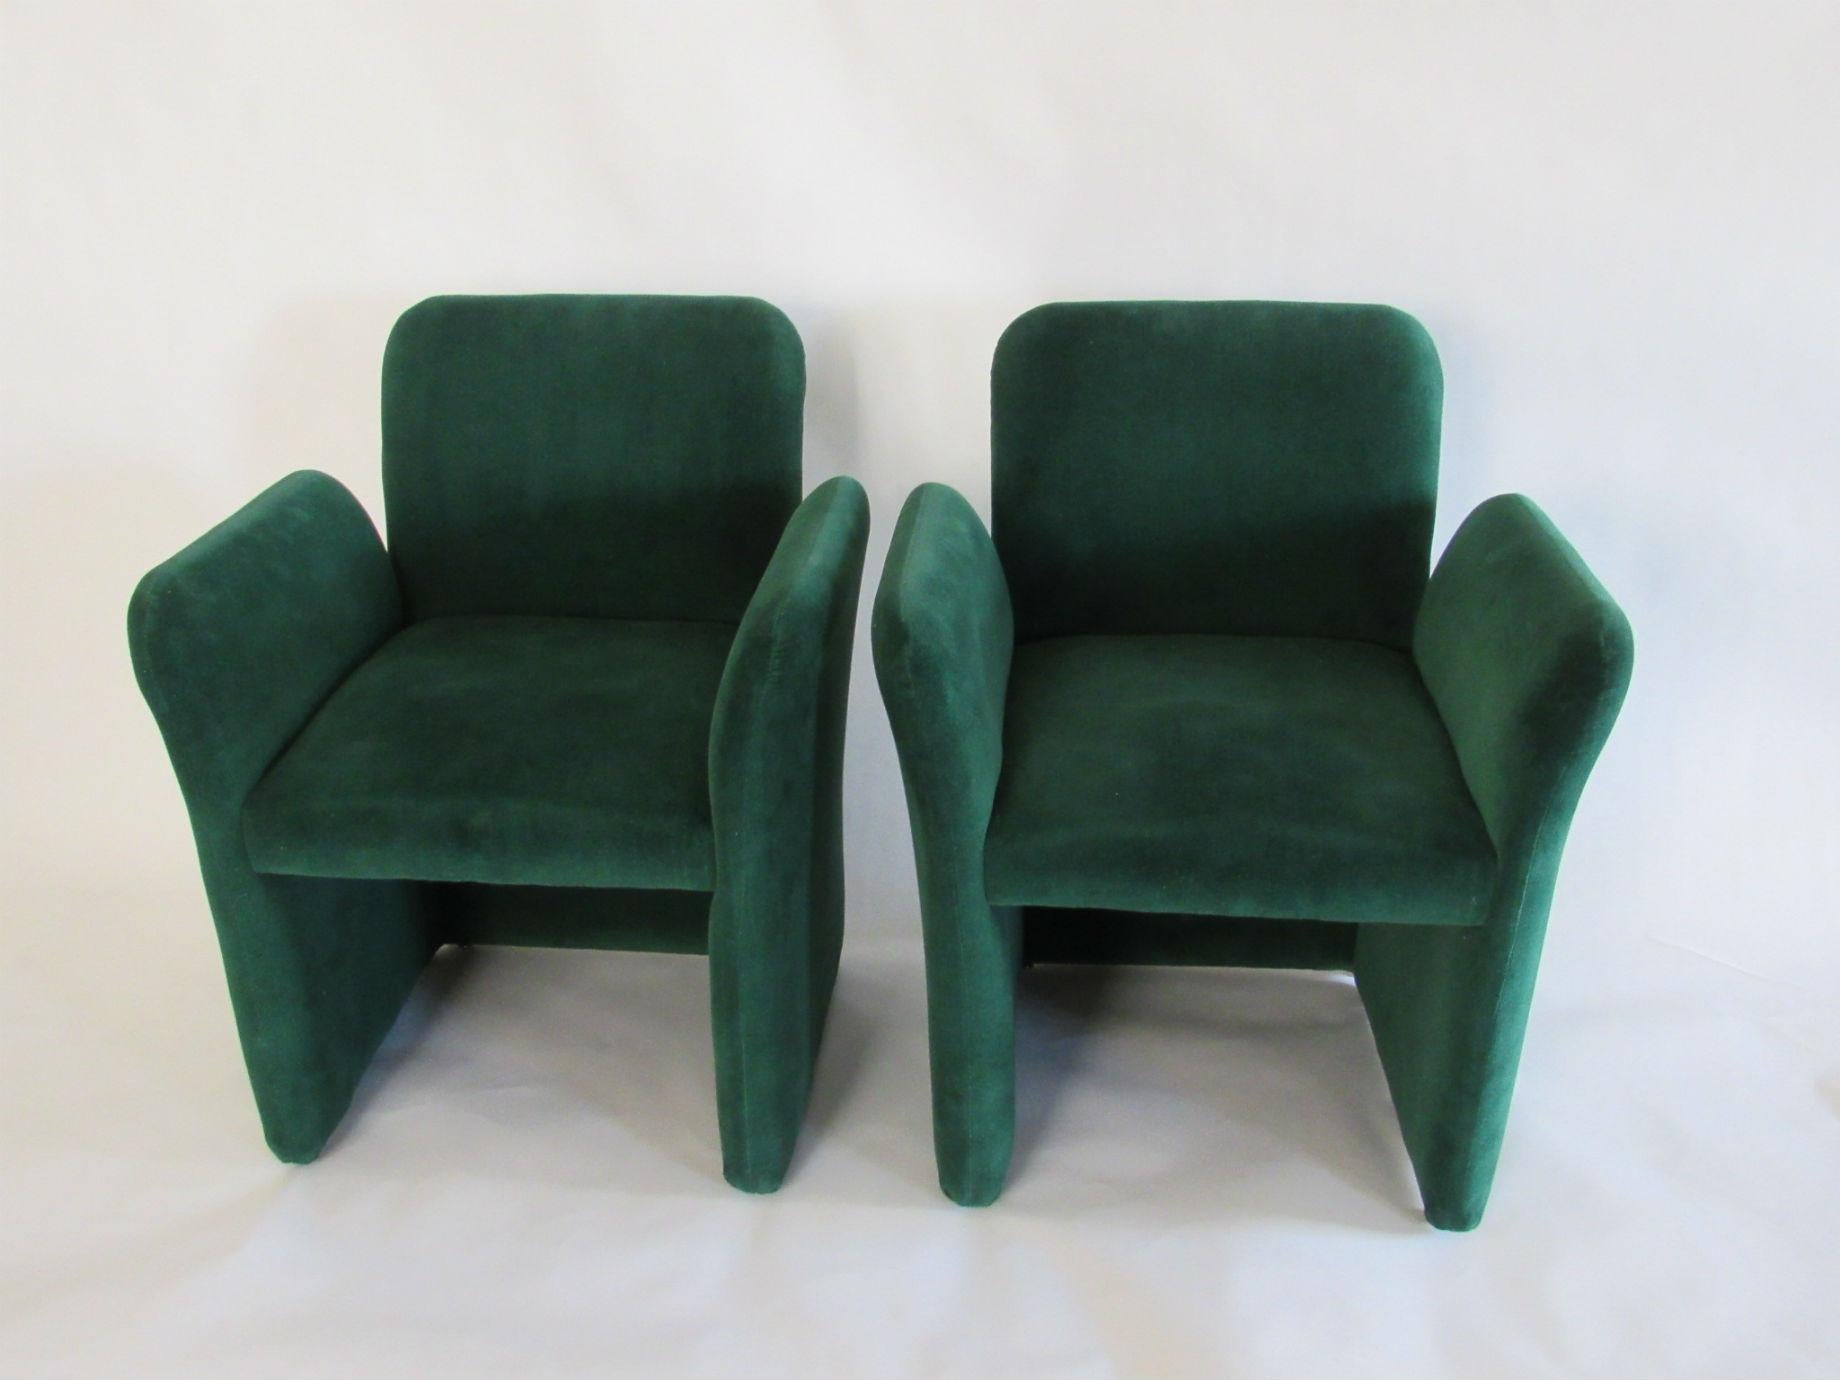 Pair of emerald green velvet upholstered armchairs by Leon Rosen for Pace 1980s. Pair of chairs with gently outwardly curved arms and original green velvet upholstery.